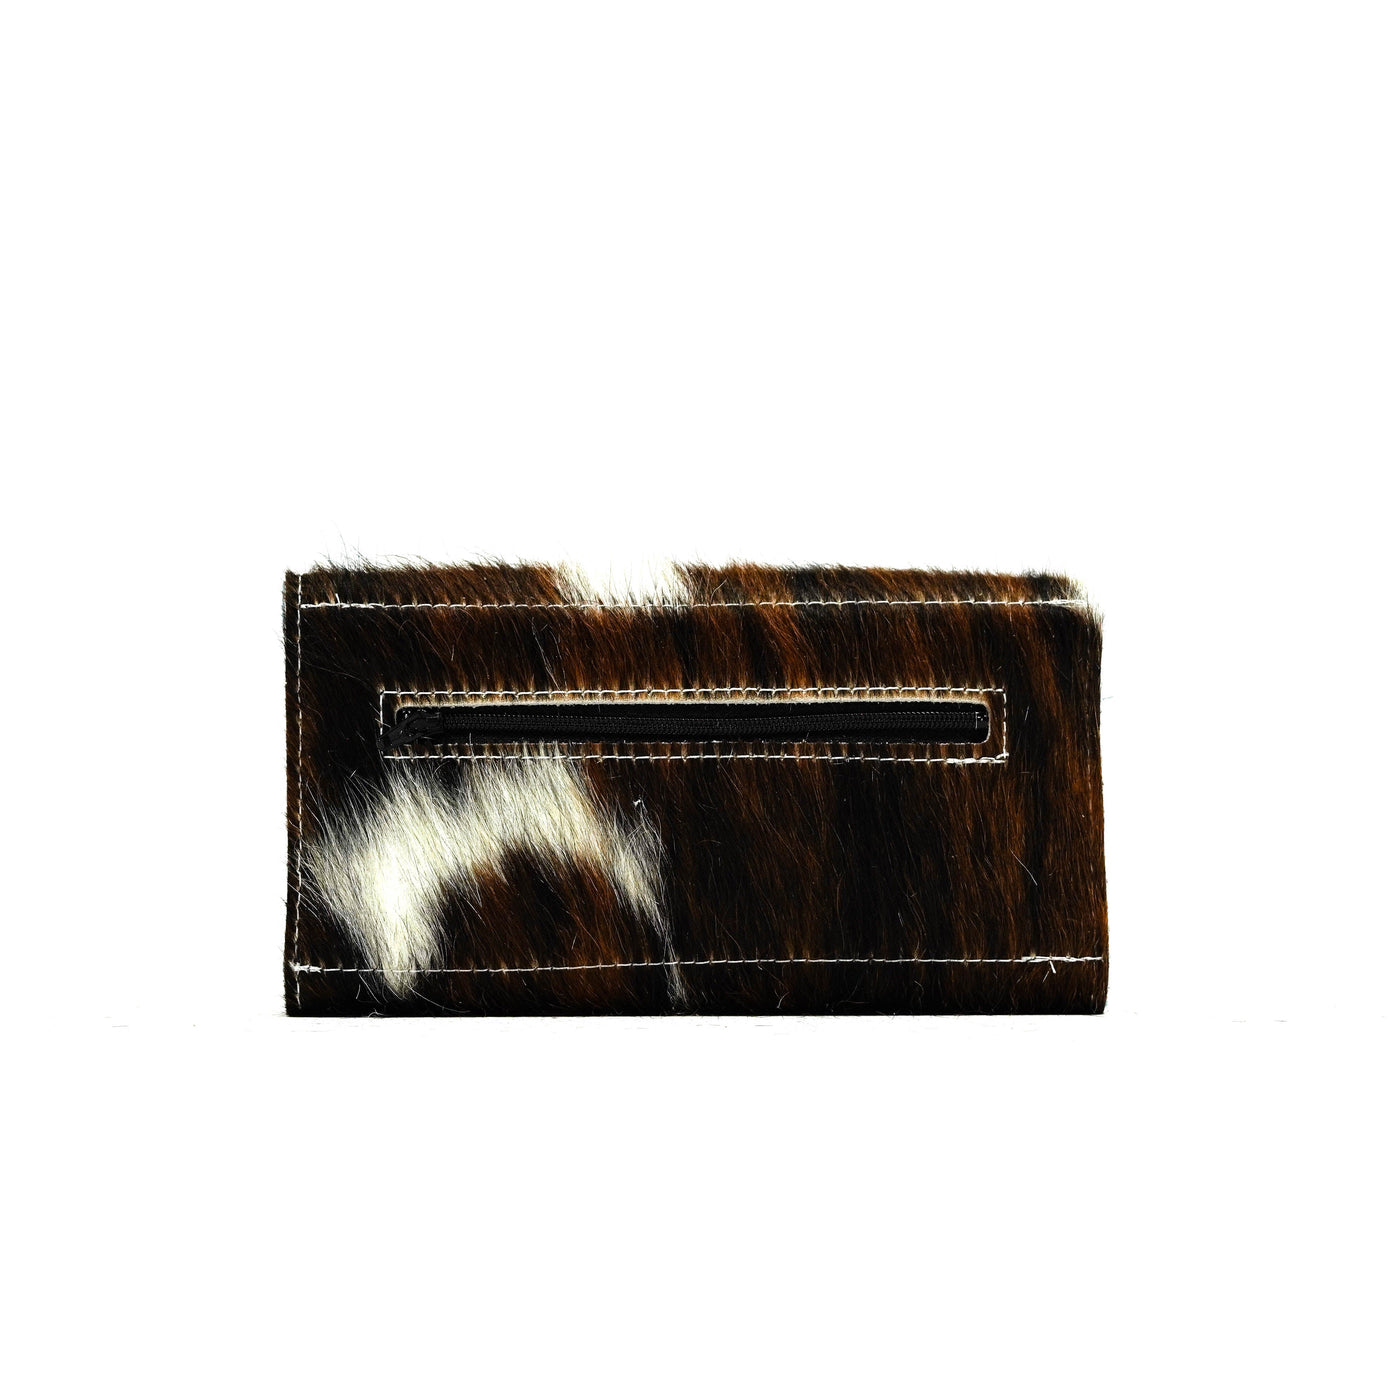 Kacey Wallet - Tricolor w/ Sea Glass Tool-Kacey Wallet-Western-Cowhide-Bags-Handmade-Products-Gifts-Dancing Cactus Designs